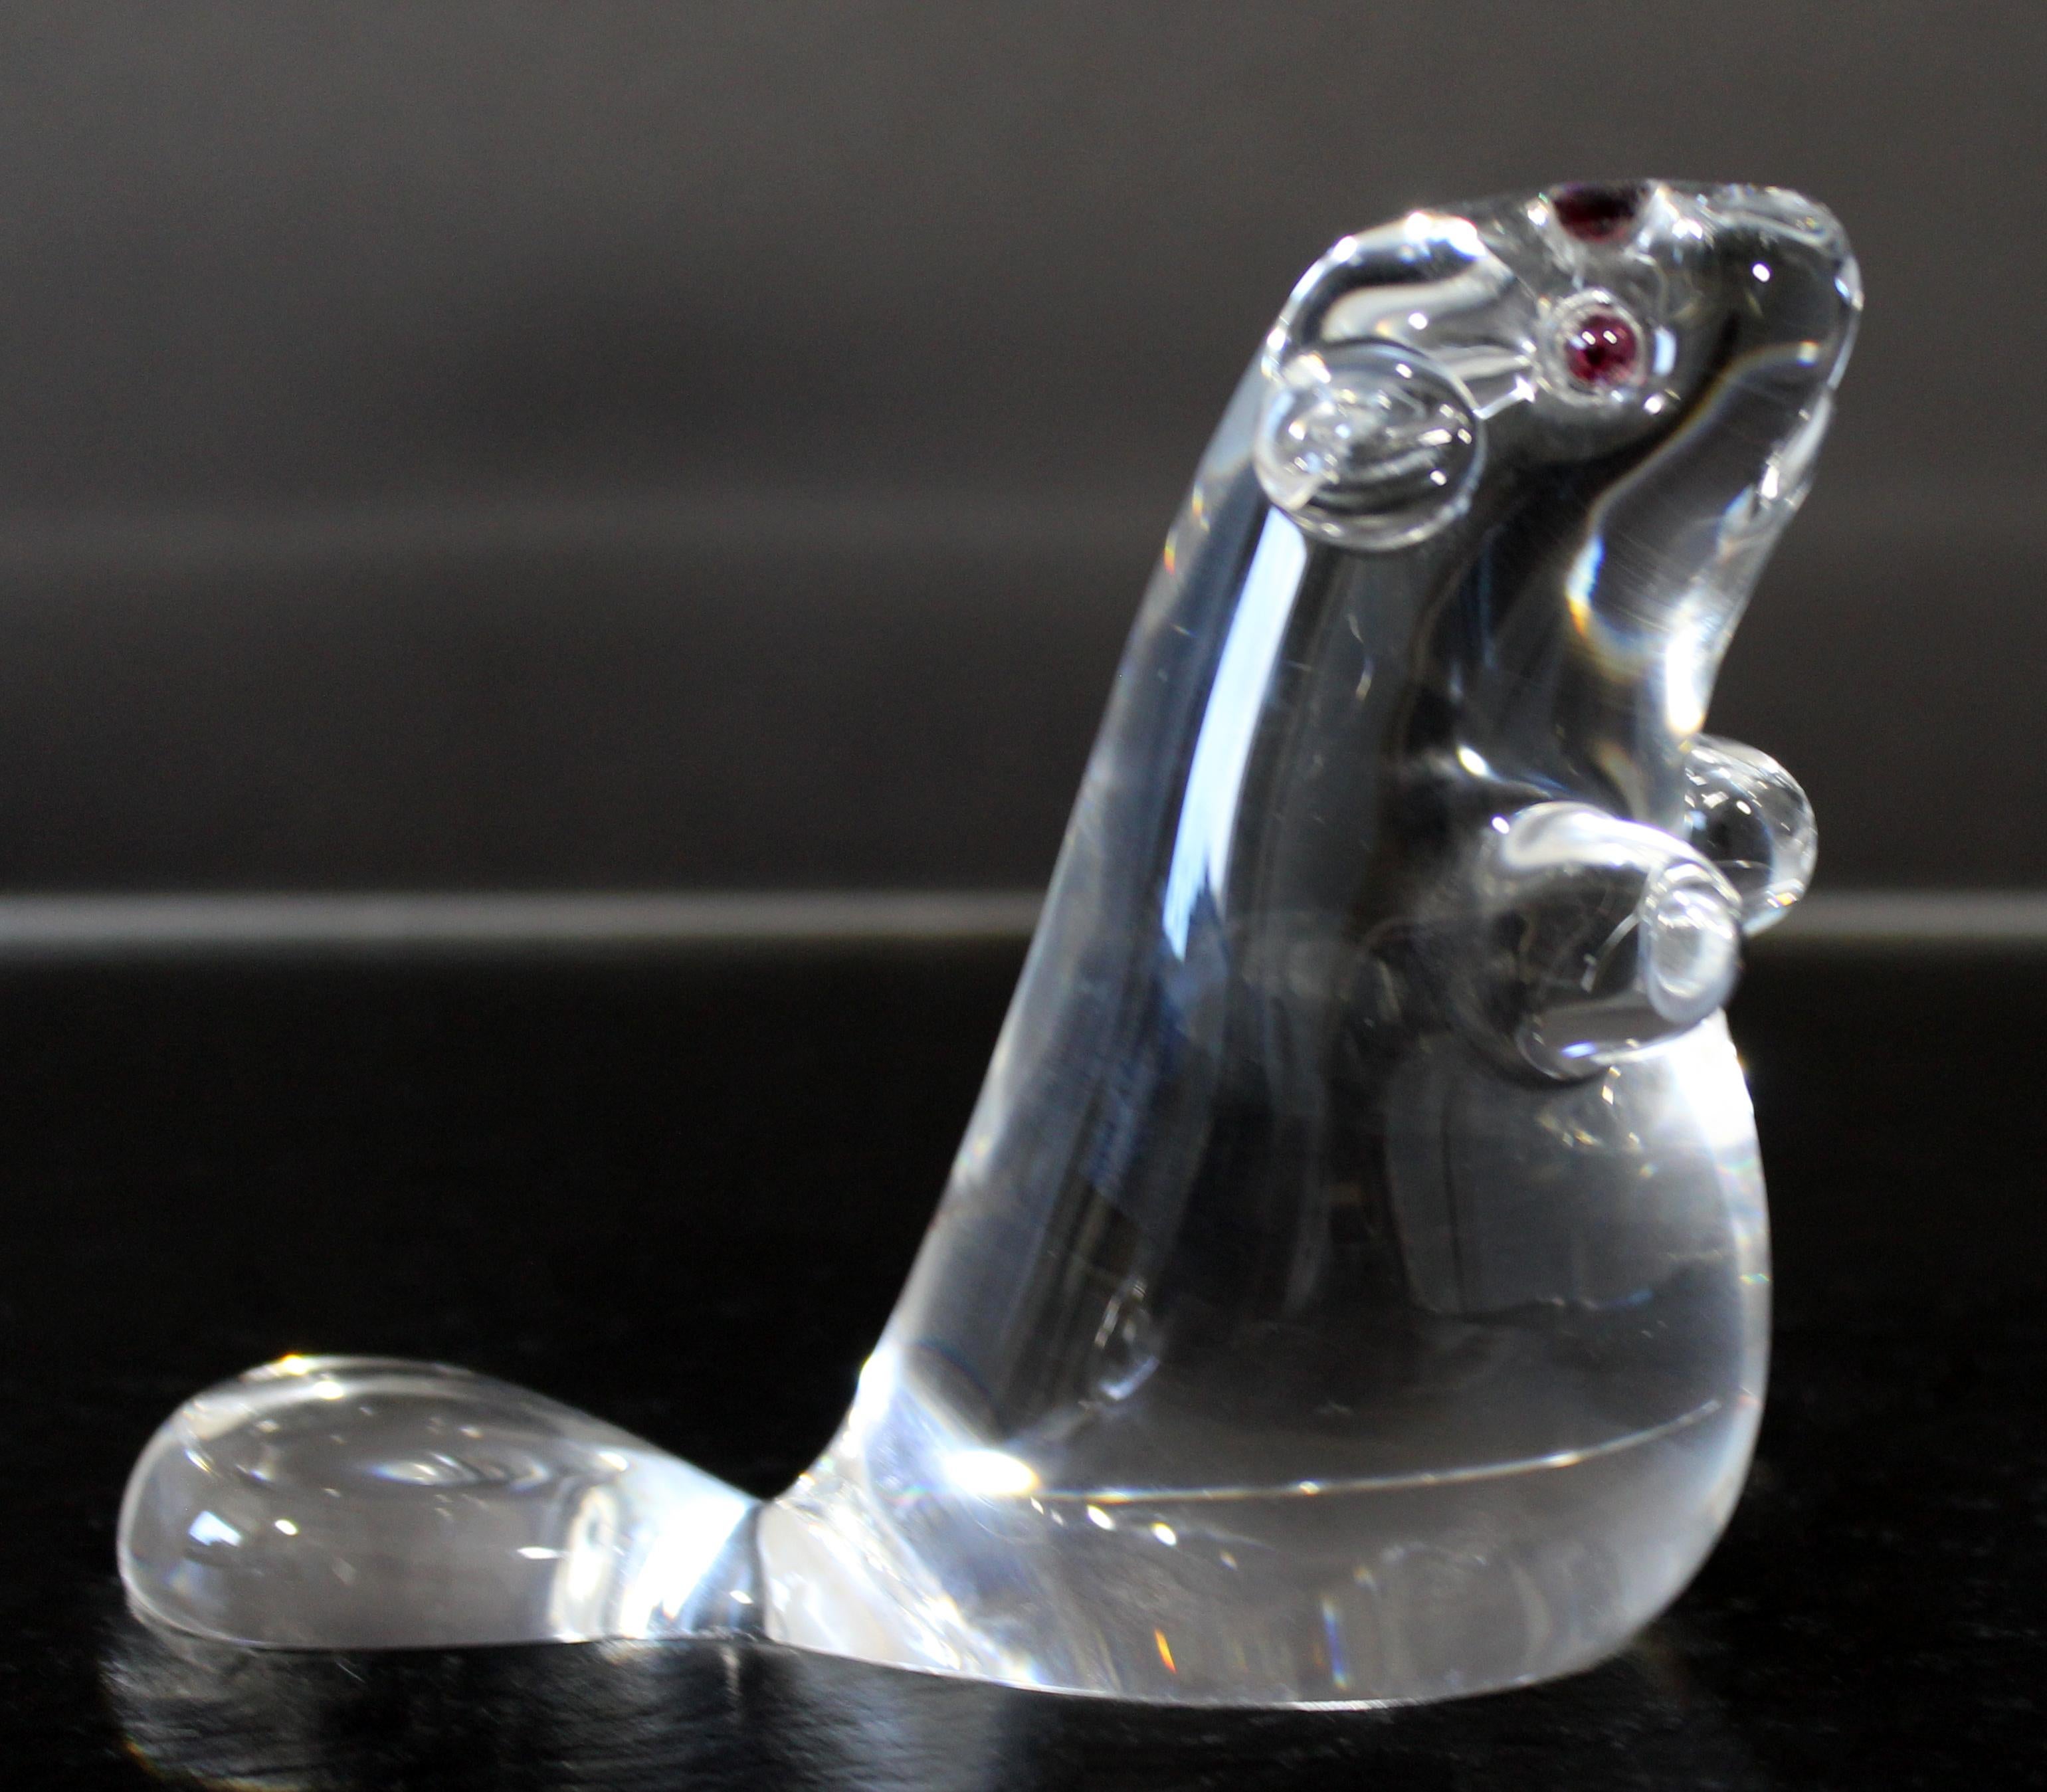 For your consideration is a gorgeous, small, Steuben signed, glass beaver statuette sculpture, with garnets for eyes. In excellent condition. The dimensions are 4.5